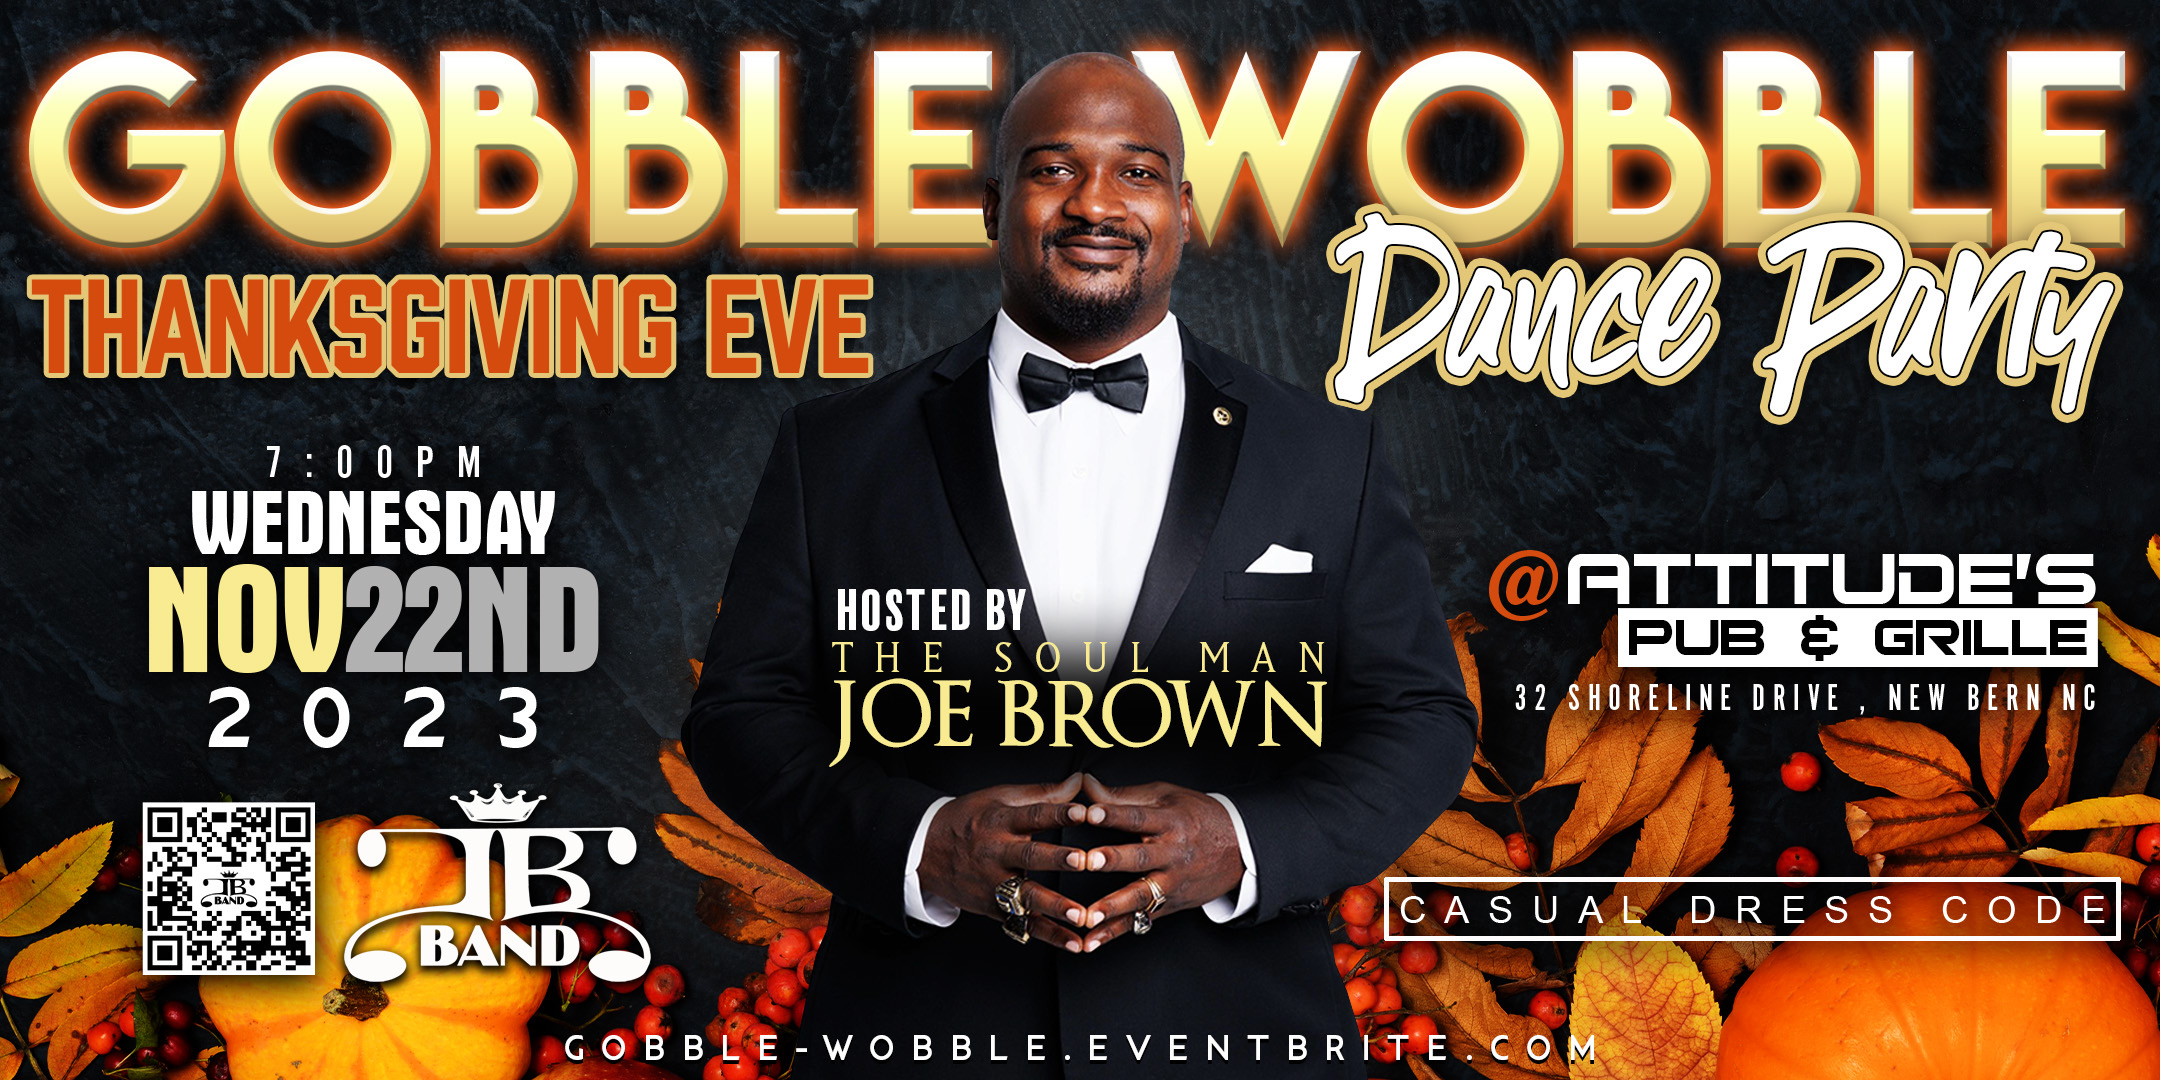 The Gobble Wobble Thanksgiving Eve Dance Party